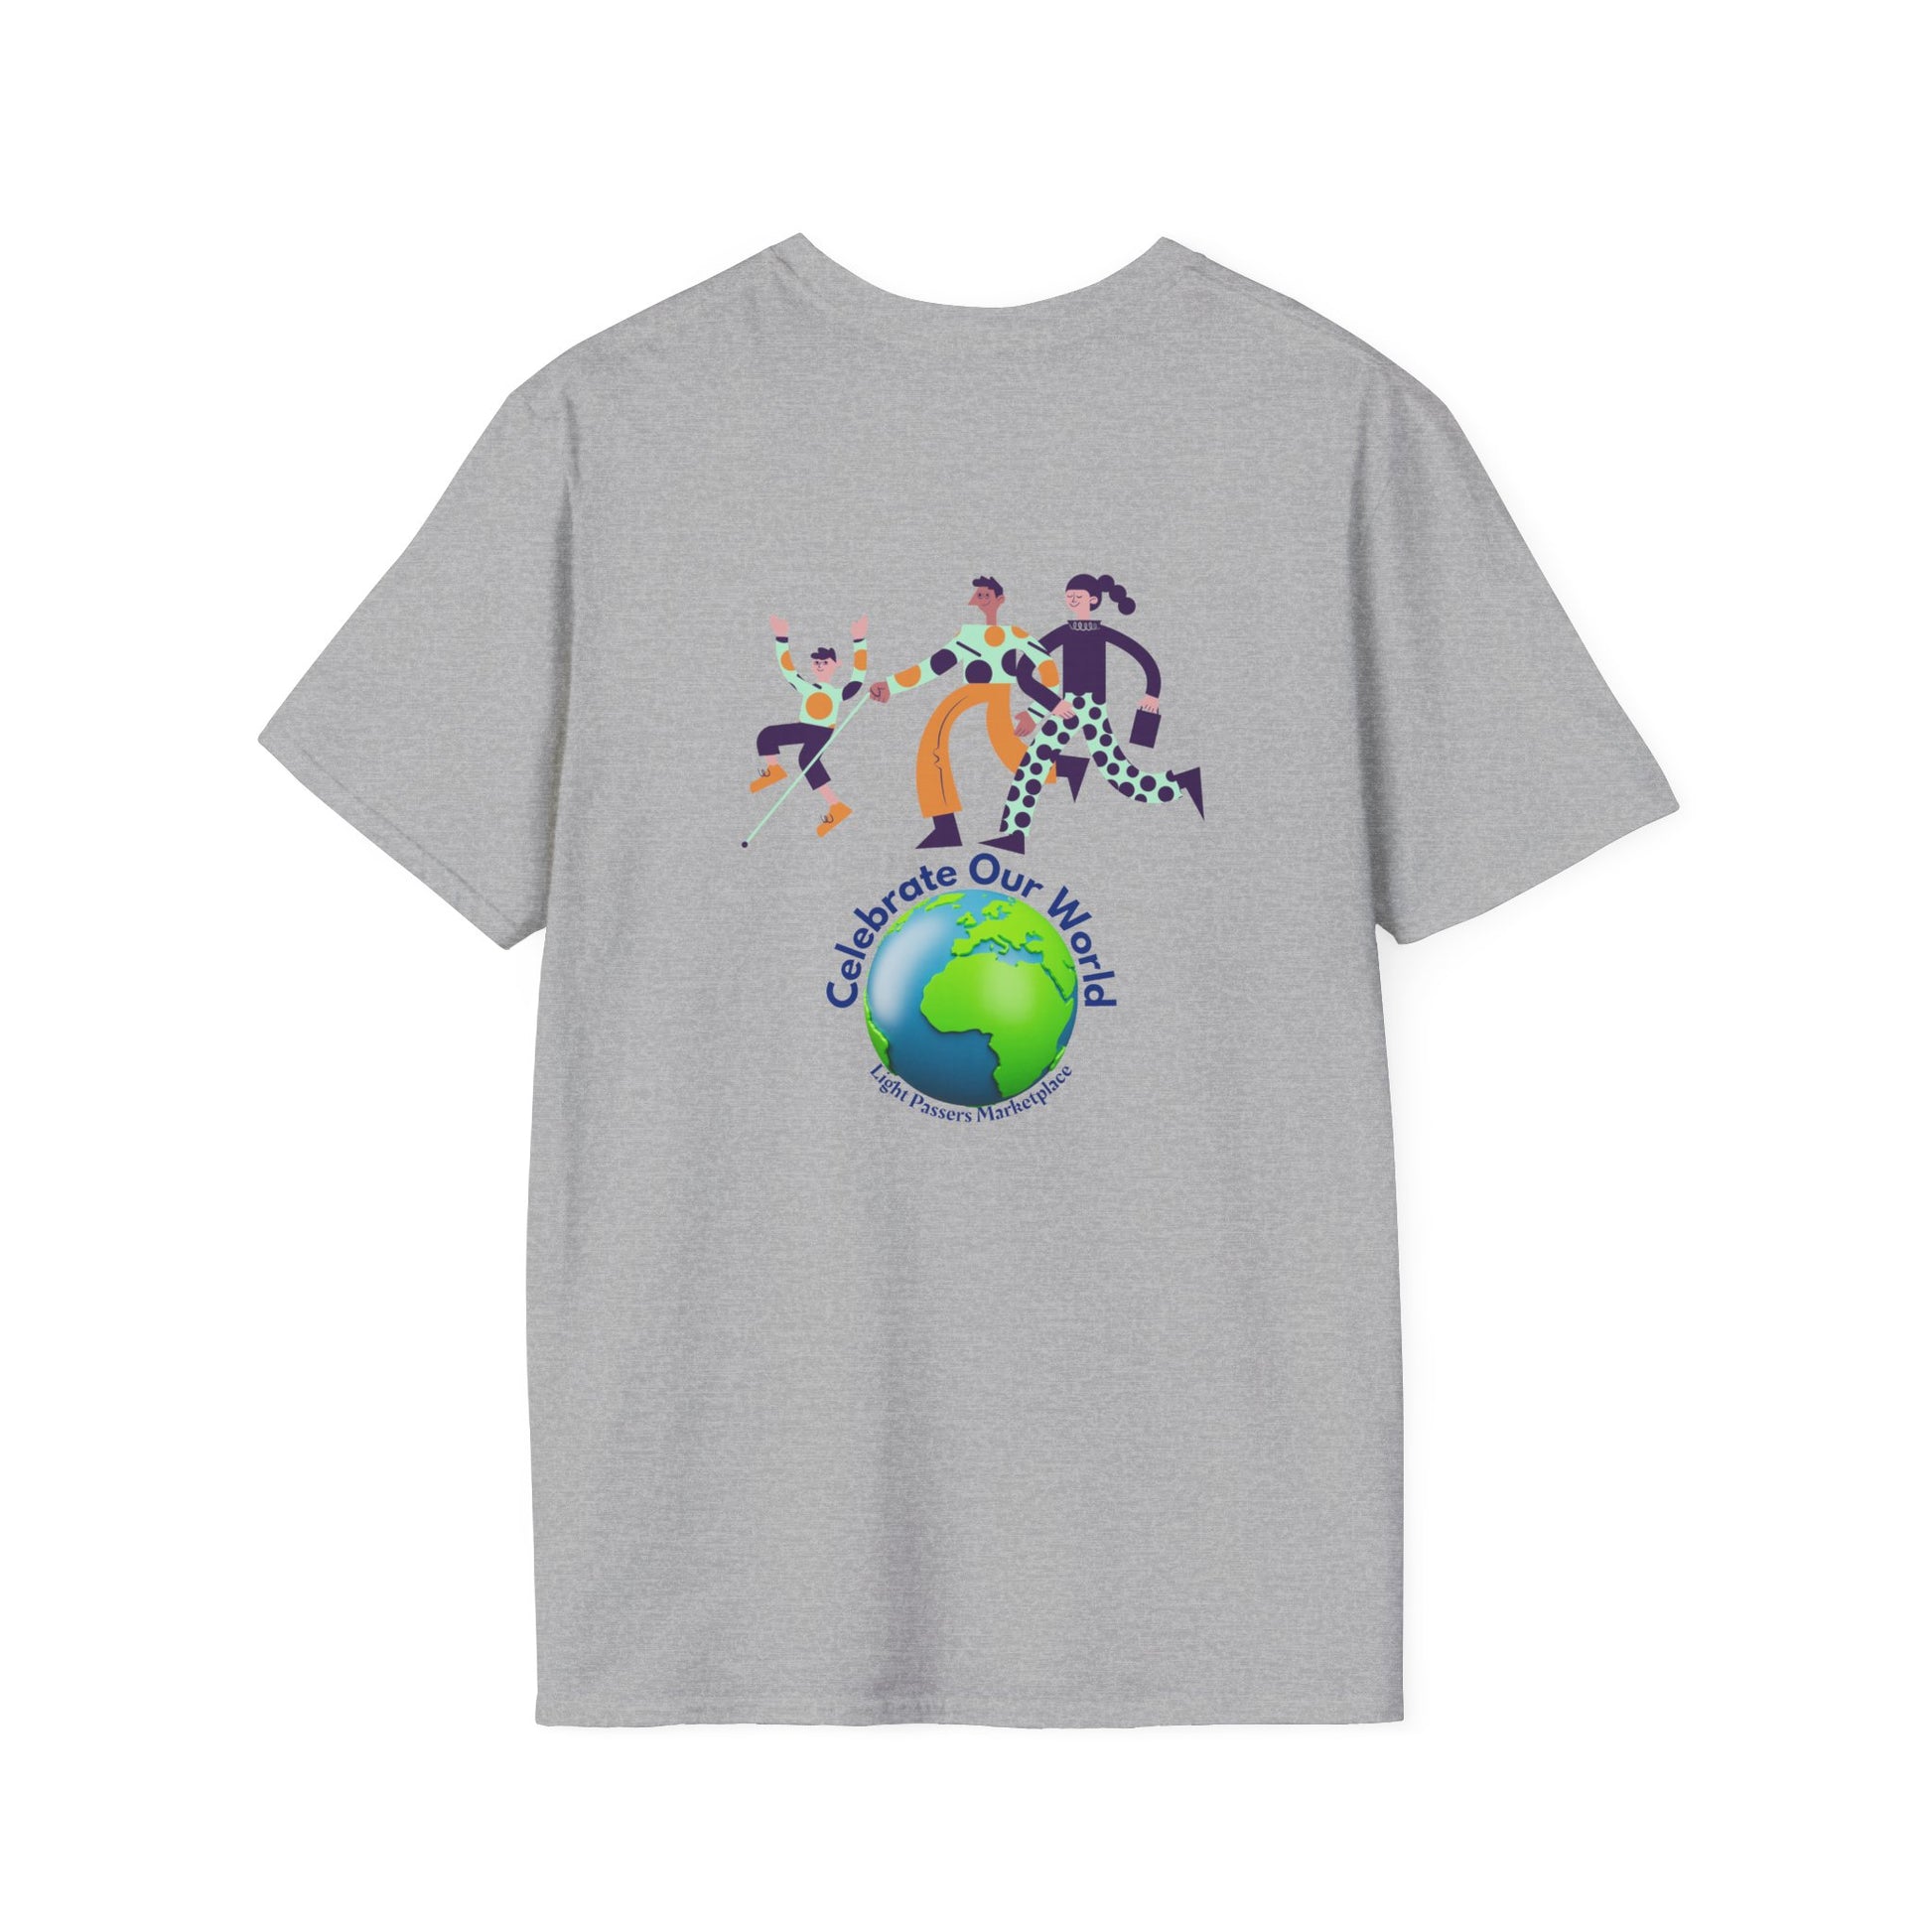 A back view of a grey unisex t-shirt with a graphic design featuring people and a globe. Made from soft 100% cotton, with twill tape shoulders for durability and a ribbed collar.